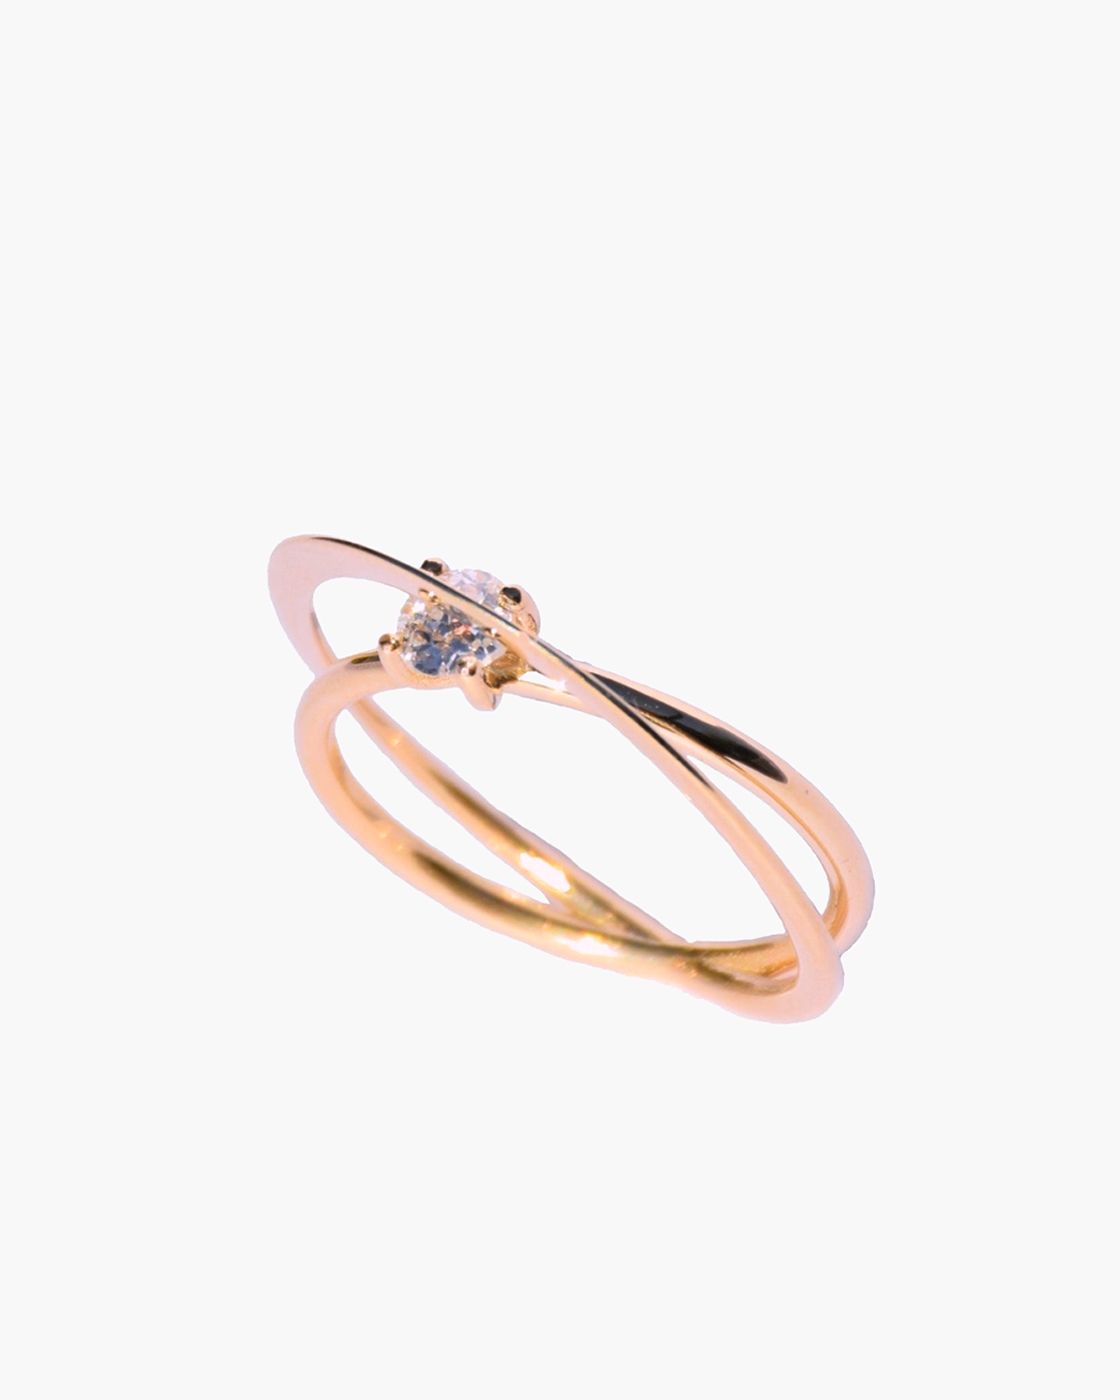 Full Moon Pink Gold Diamond Solitaire Ring